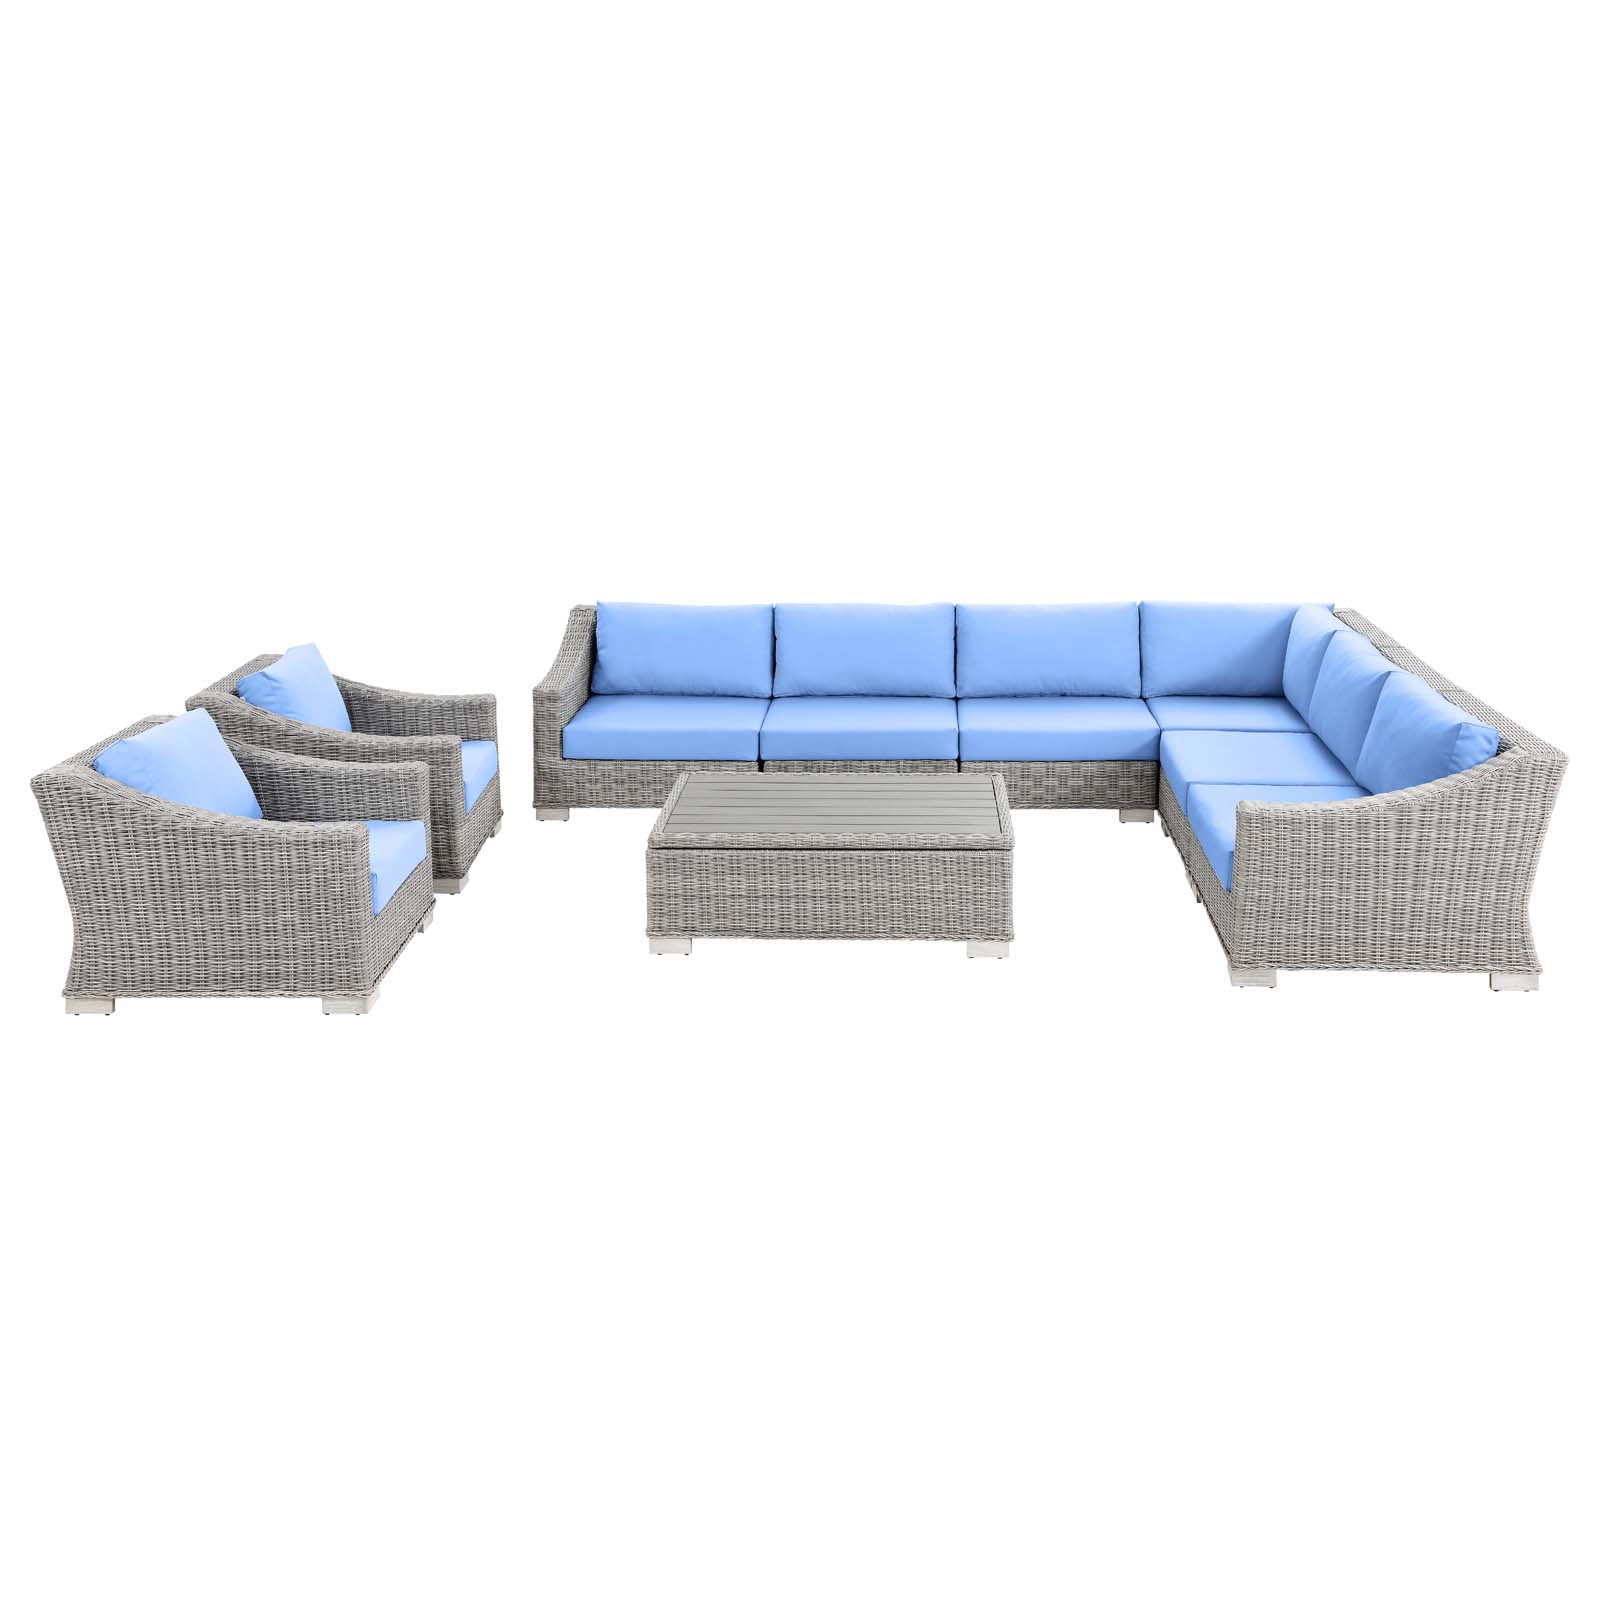 Lounge Sectional Sofa Chair Table Set, Rattan, Wicker, Light Grey Gray Light Blue, Modern Contemporary Urban Design, Outdoor Patio Balcony Cafe Bistro Garden Furniture Hotel Hospitality - image 1 of 10